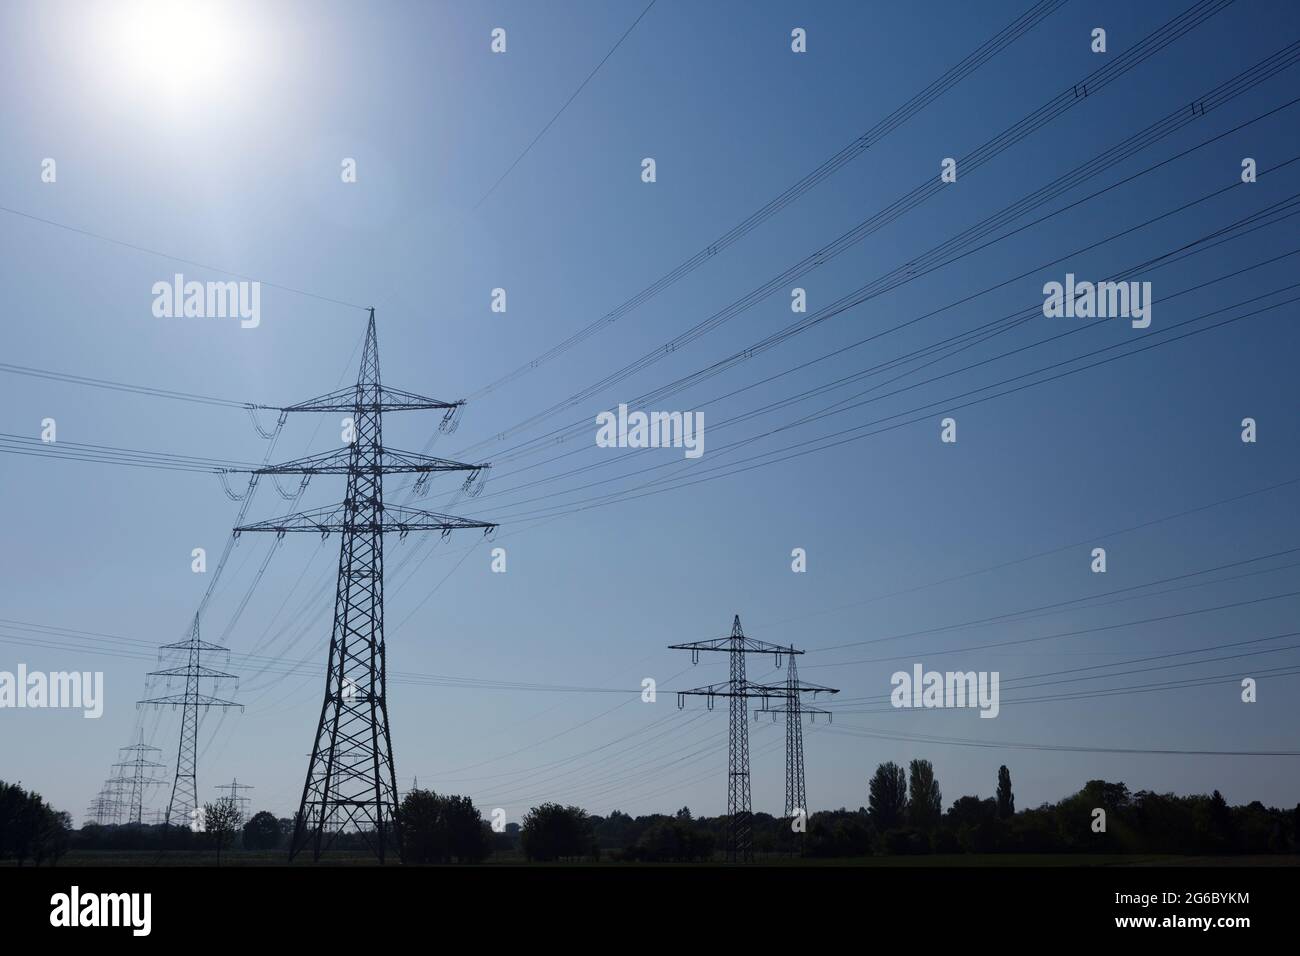 Electricity pylons against a clear blue sky on a sunny day Stock Photo